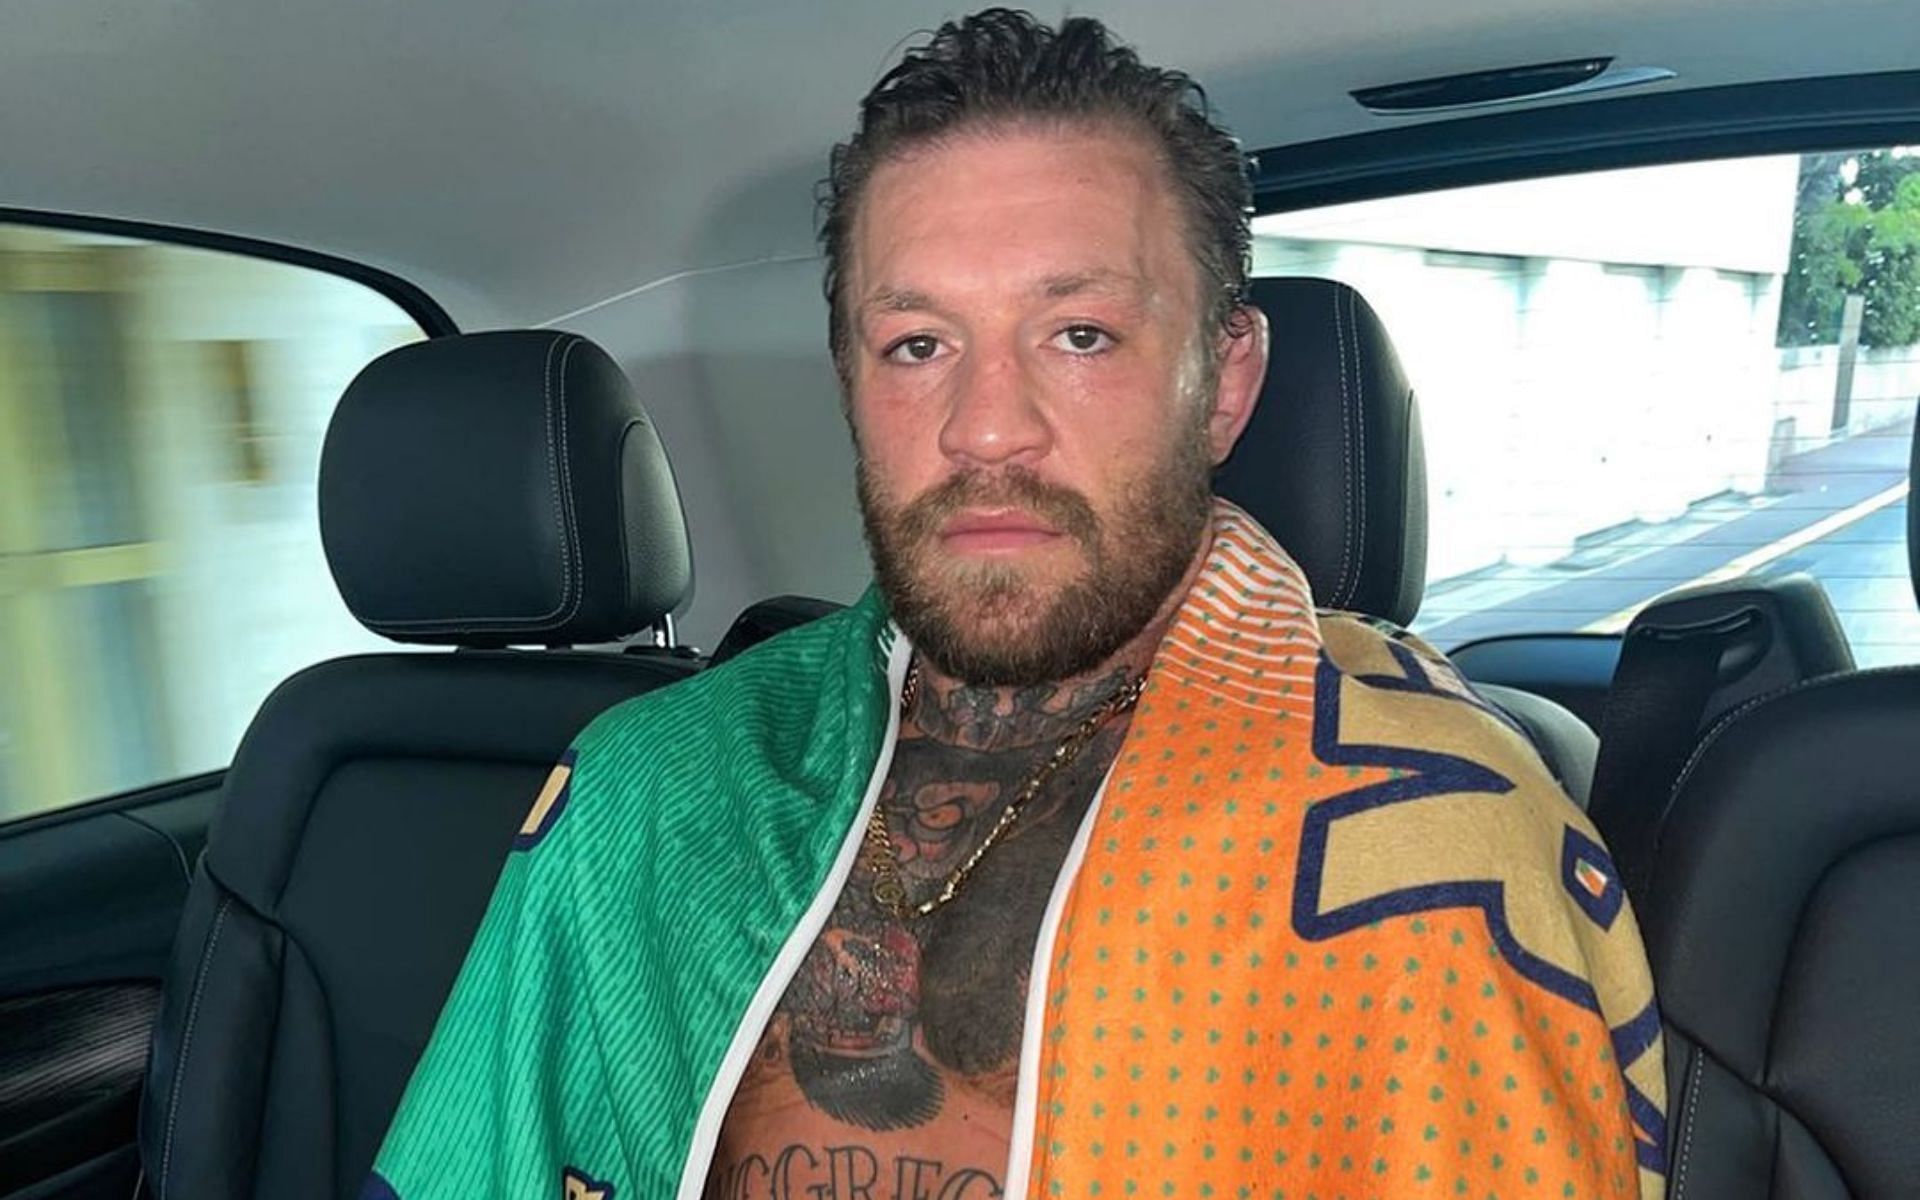 Conor McGregor wearing the Irish colors (Image credits @thenotoriousmma on Instagram)